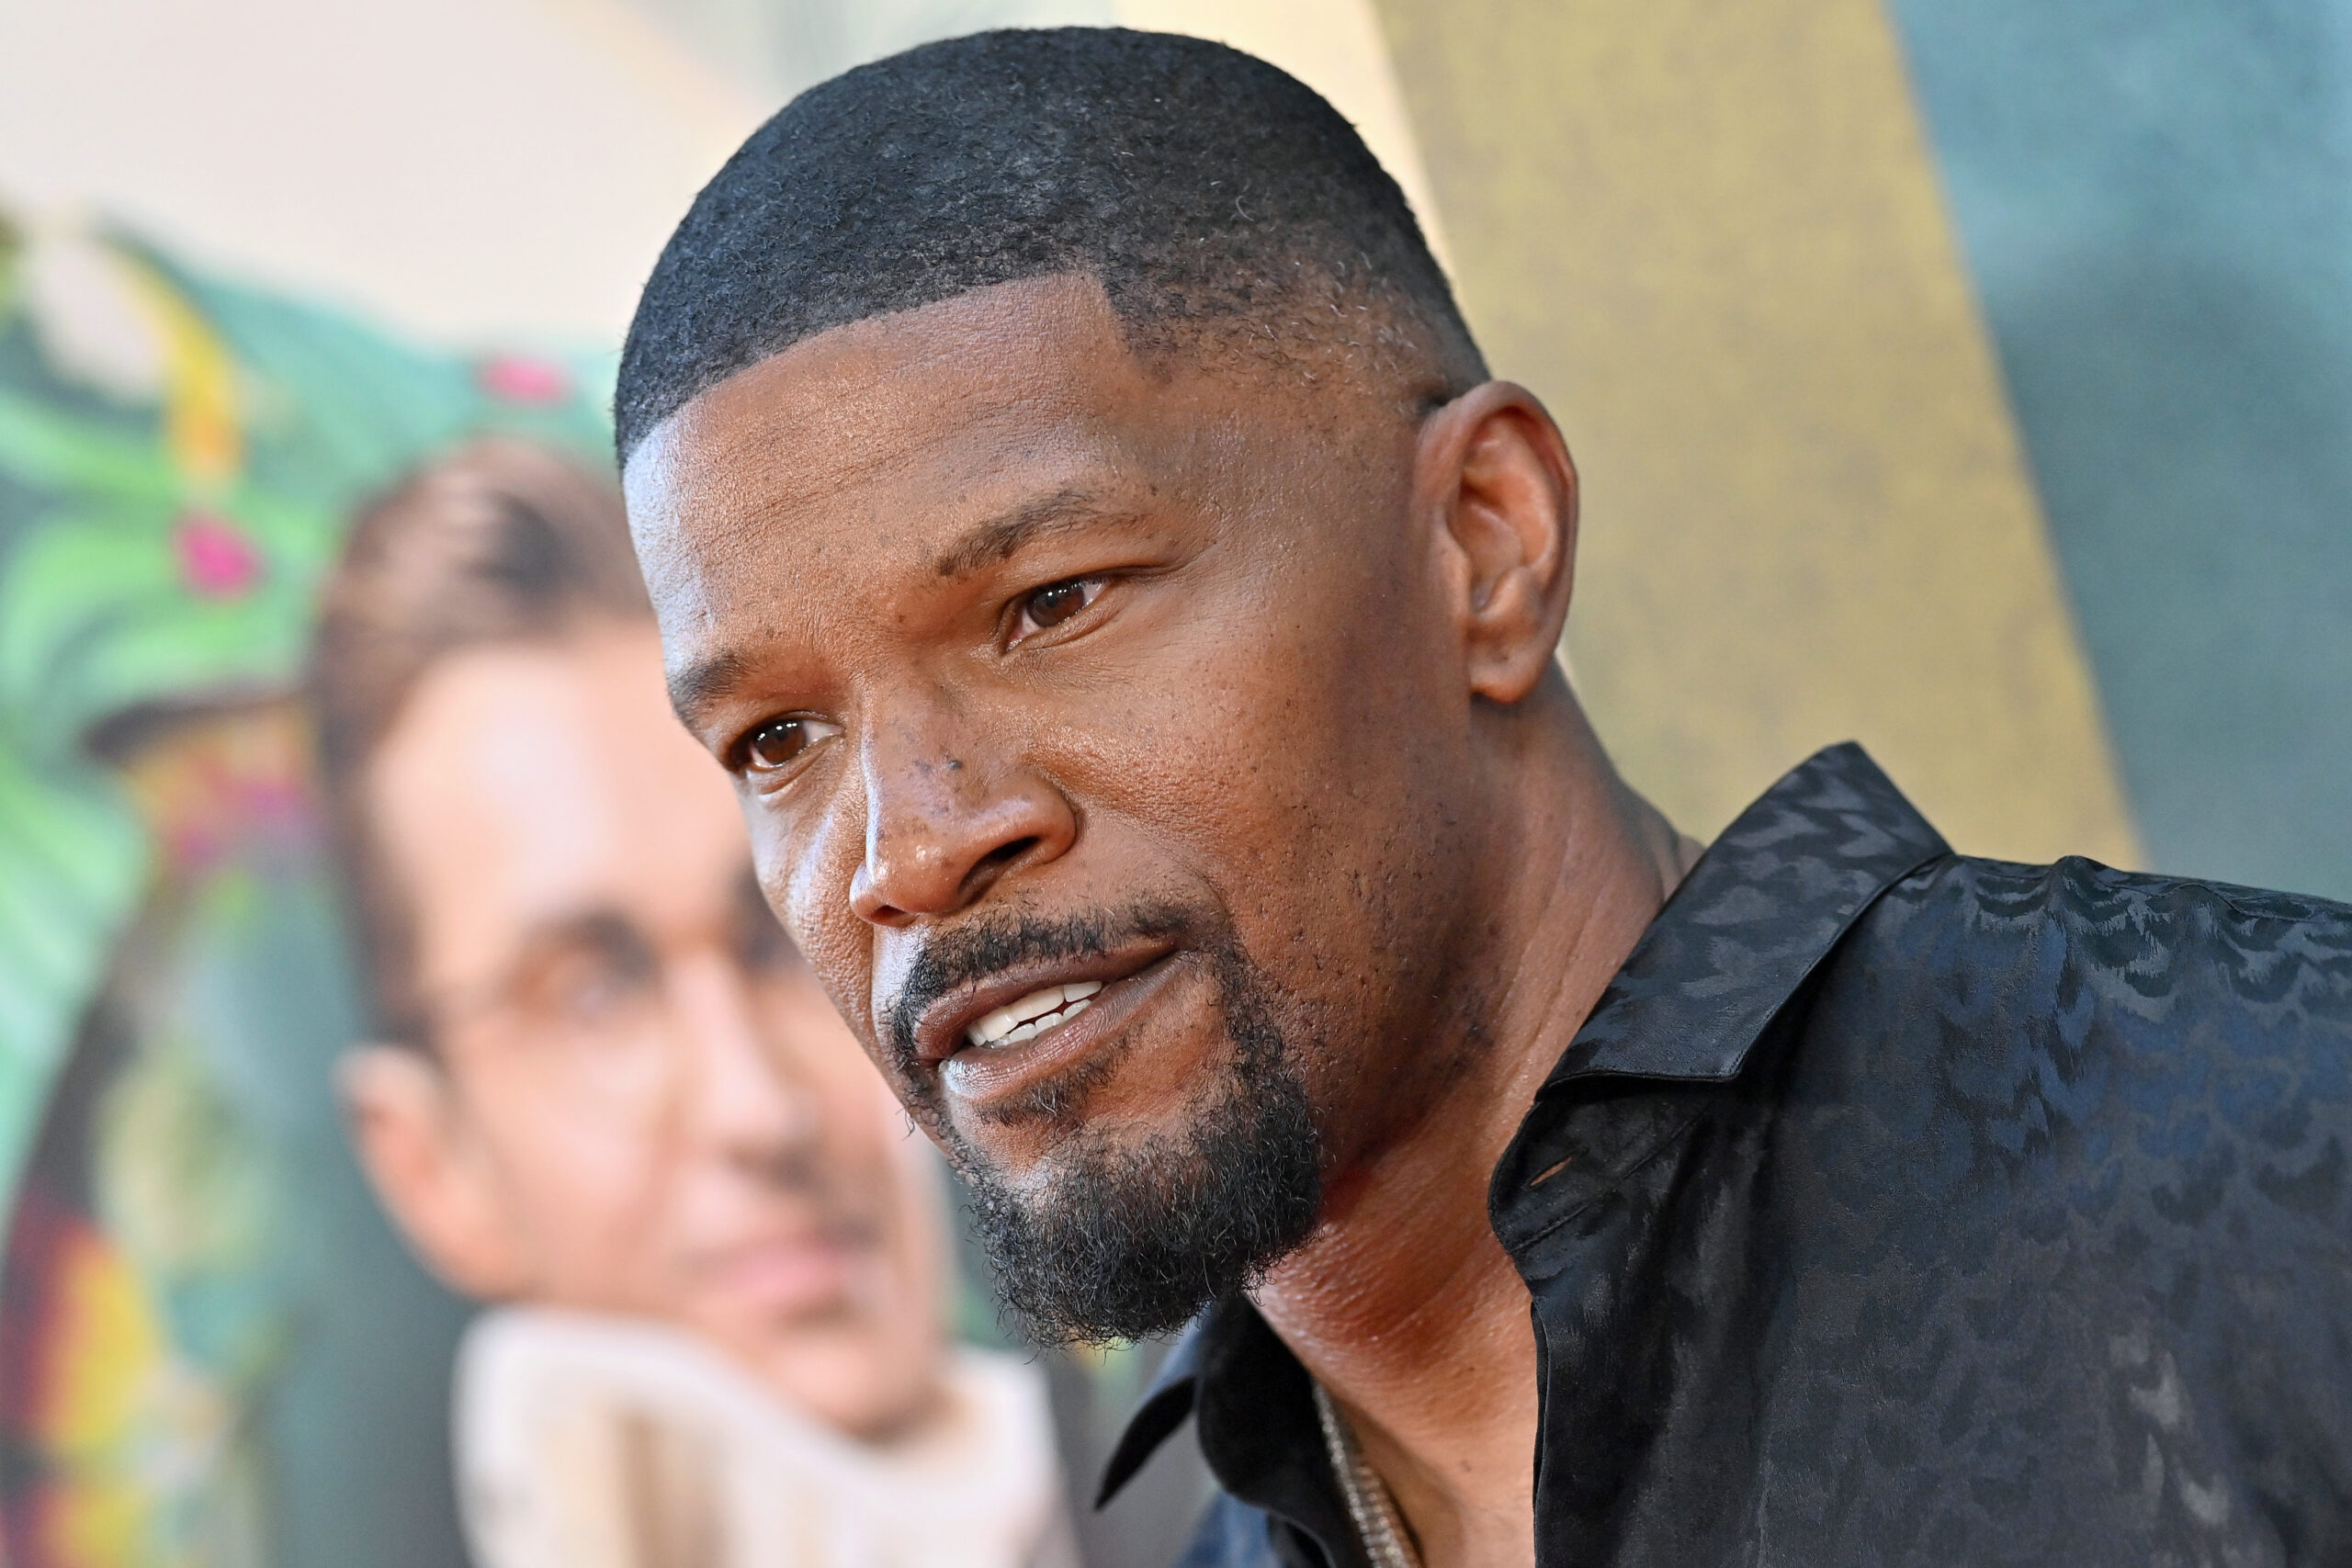 Fans Want Jamie Foxx to Release New Music After Tank Shares Video of Actor Onstage